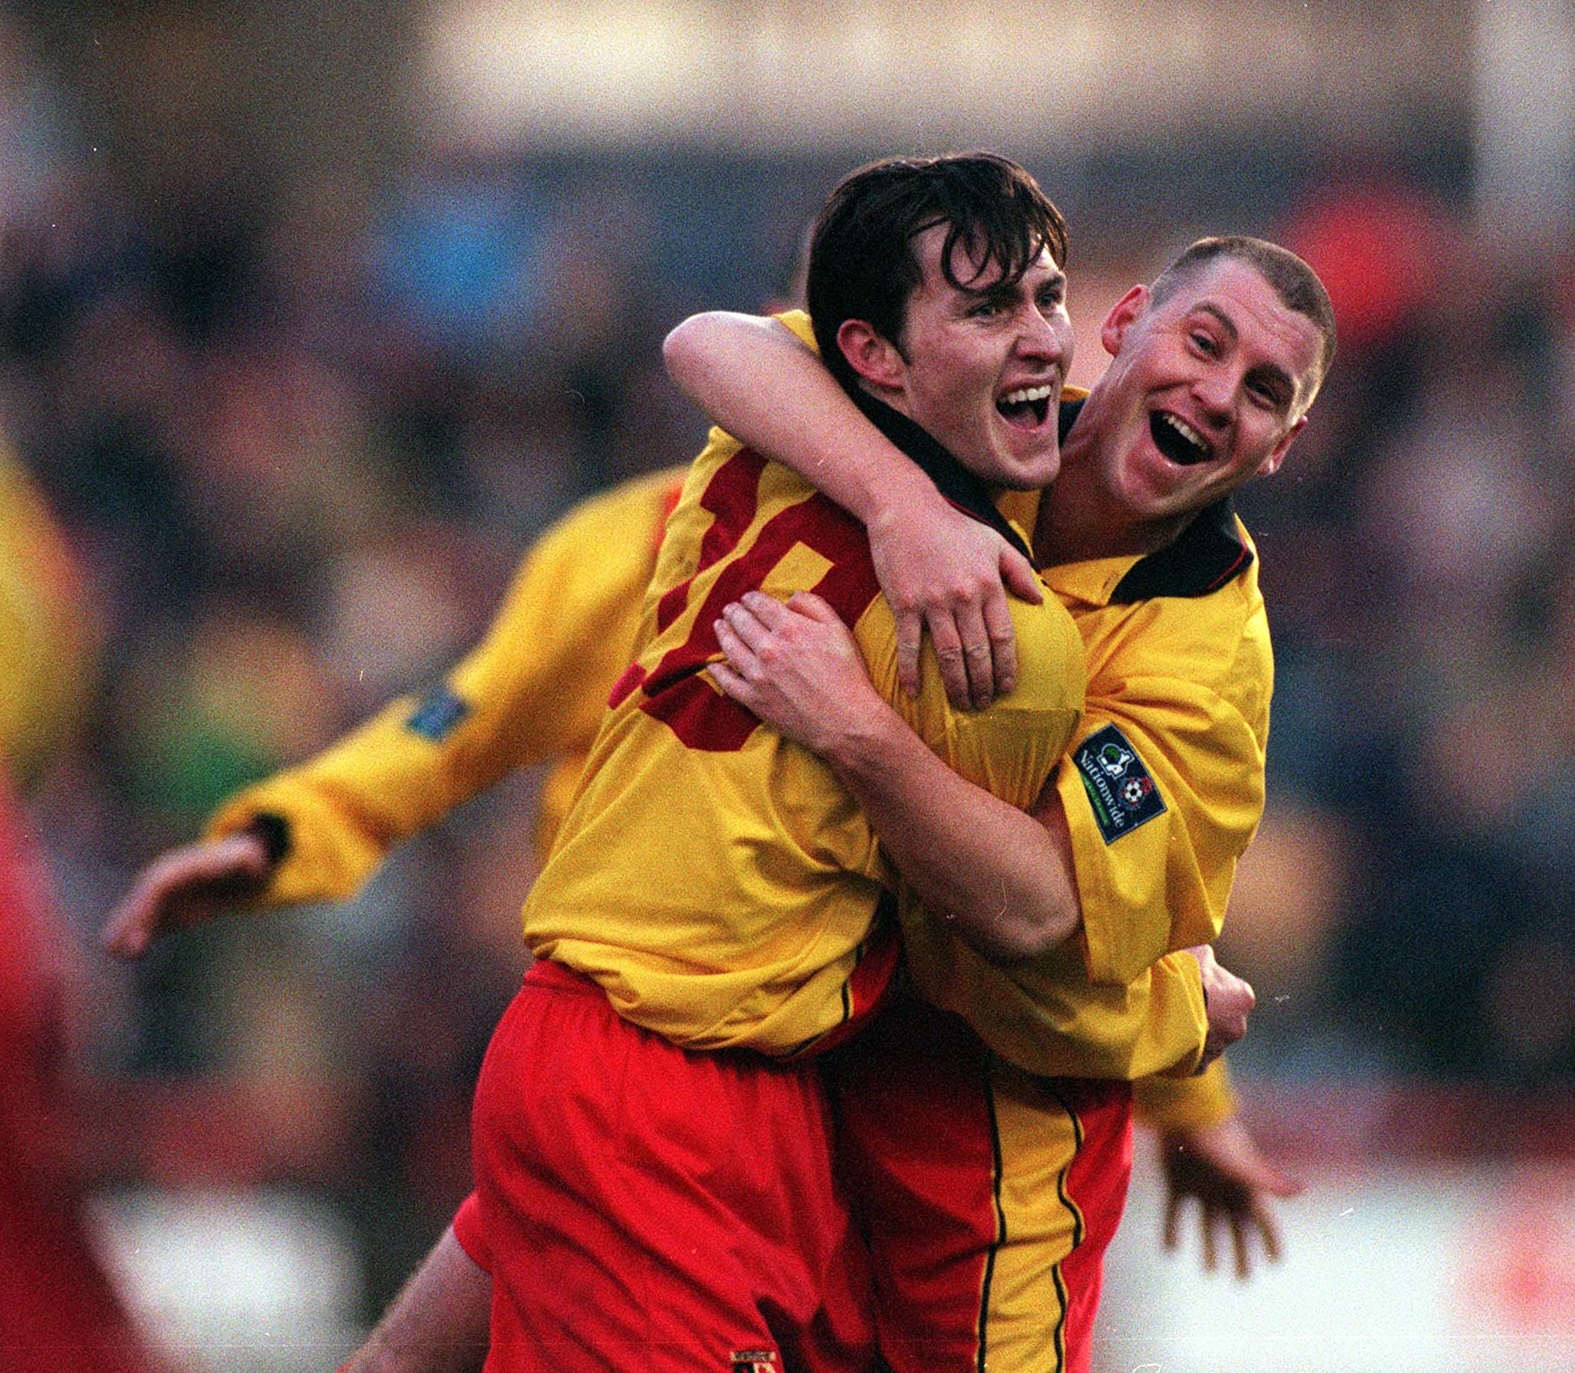 Watford great Gibbs on what it takes to get Championship promotion